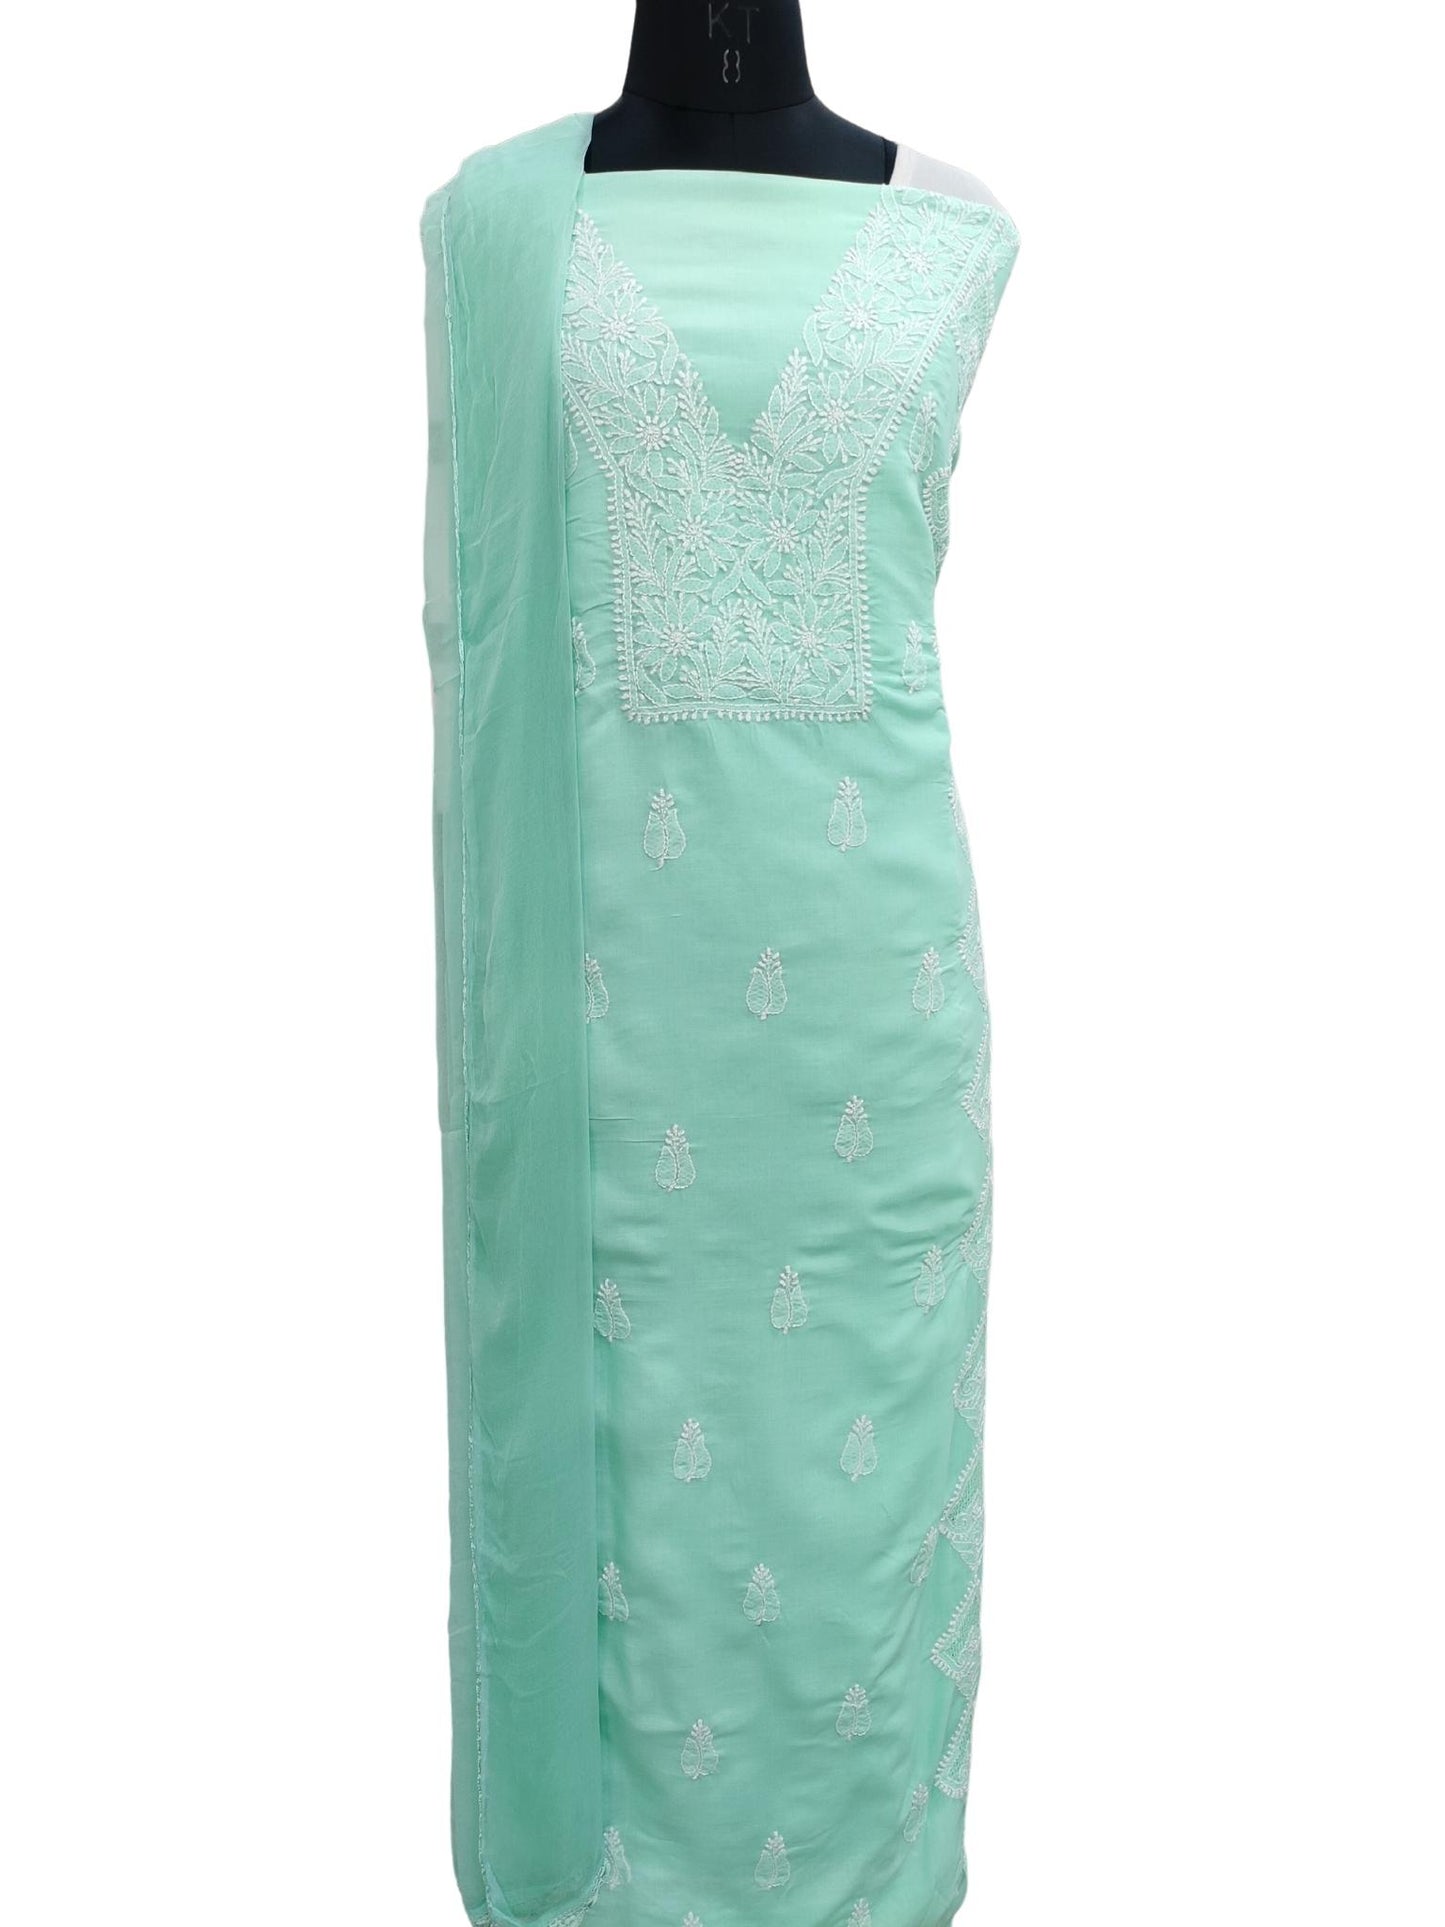 Shyamal Chikan Hand Embroidered Sea Green Cotton Lucknowi Chikankari Unstitched Suit Piece With Jaali Work - S19287